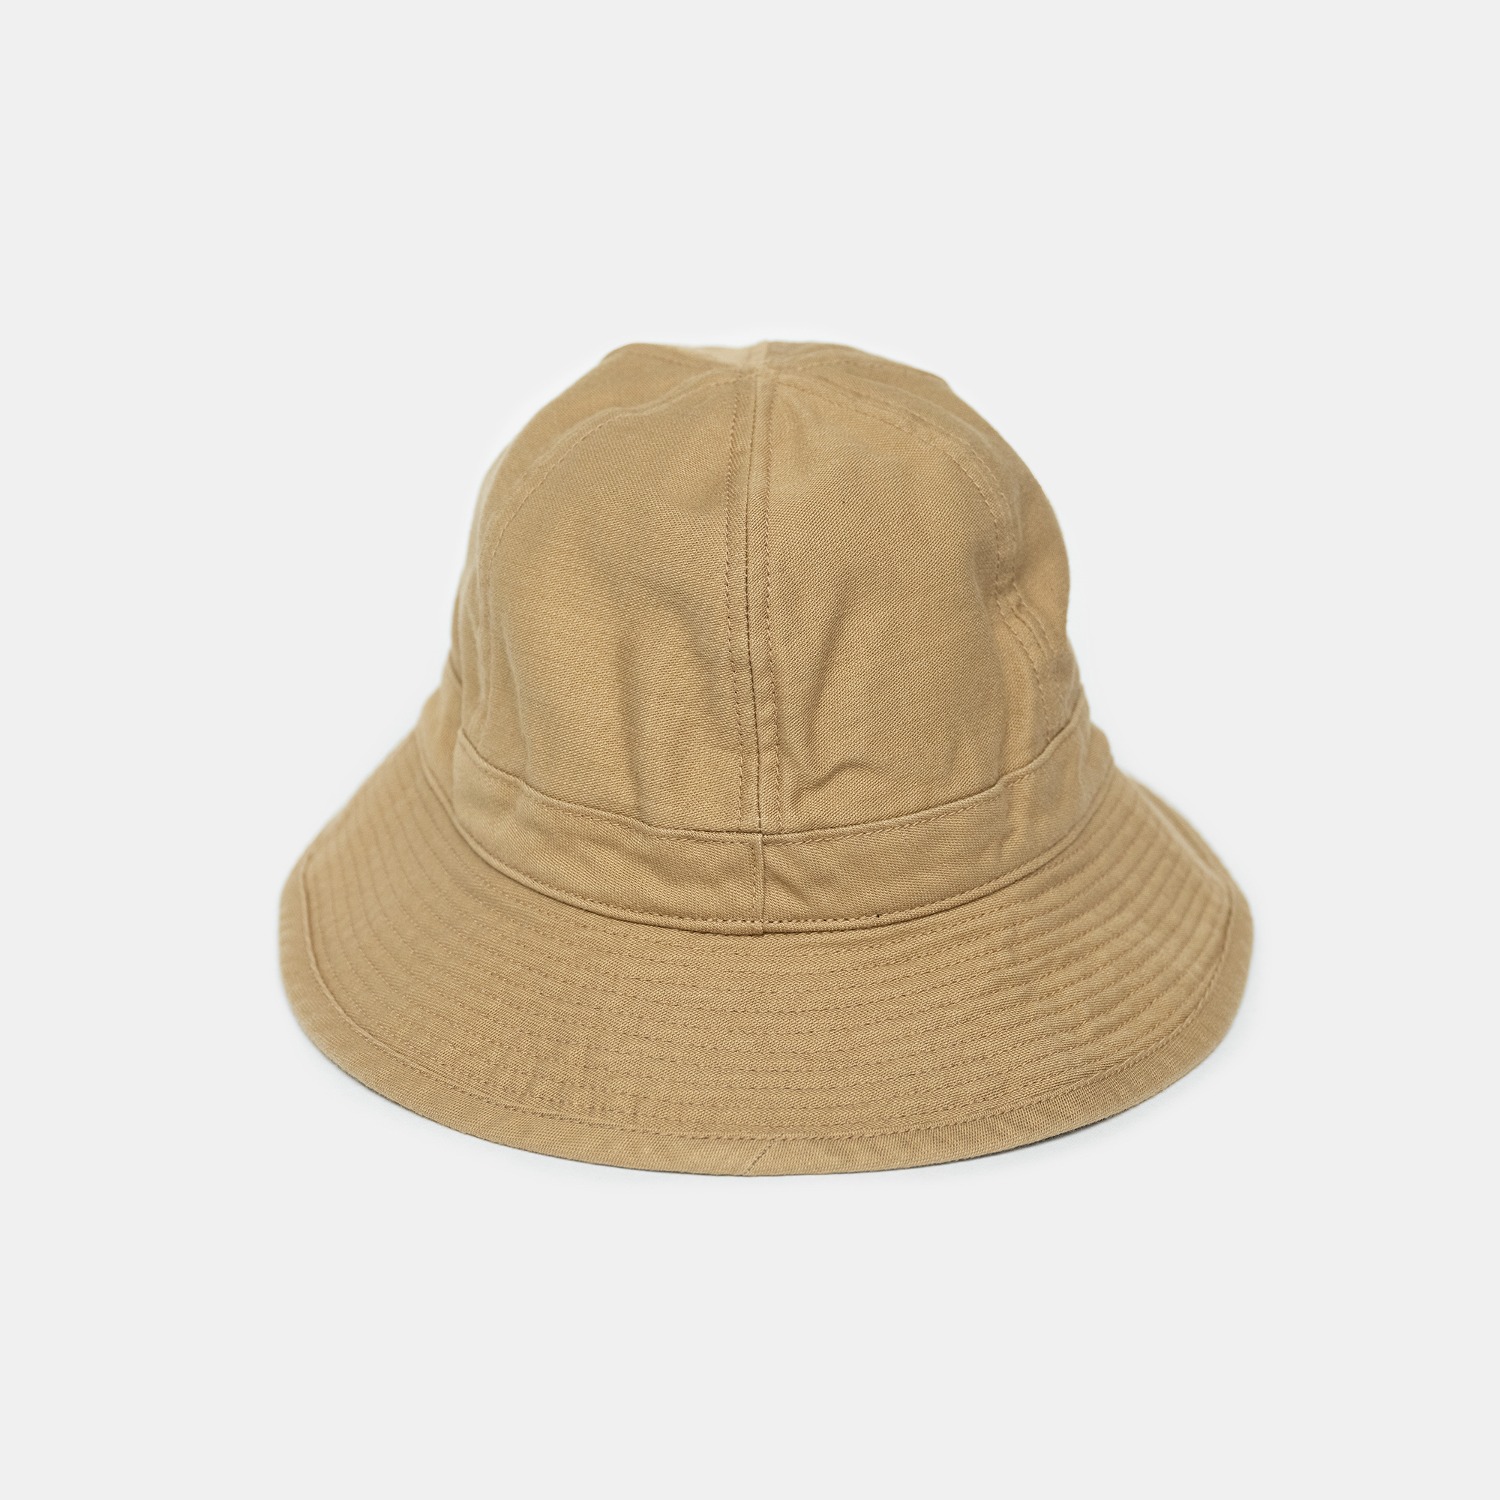 ﻿﻿Baker Back Satin Metro Hat with Drawcord